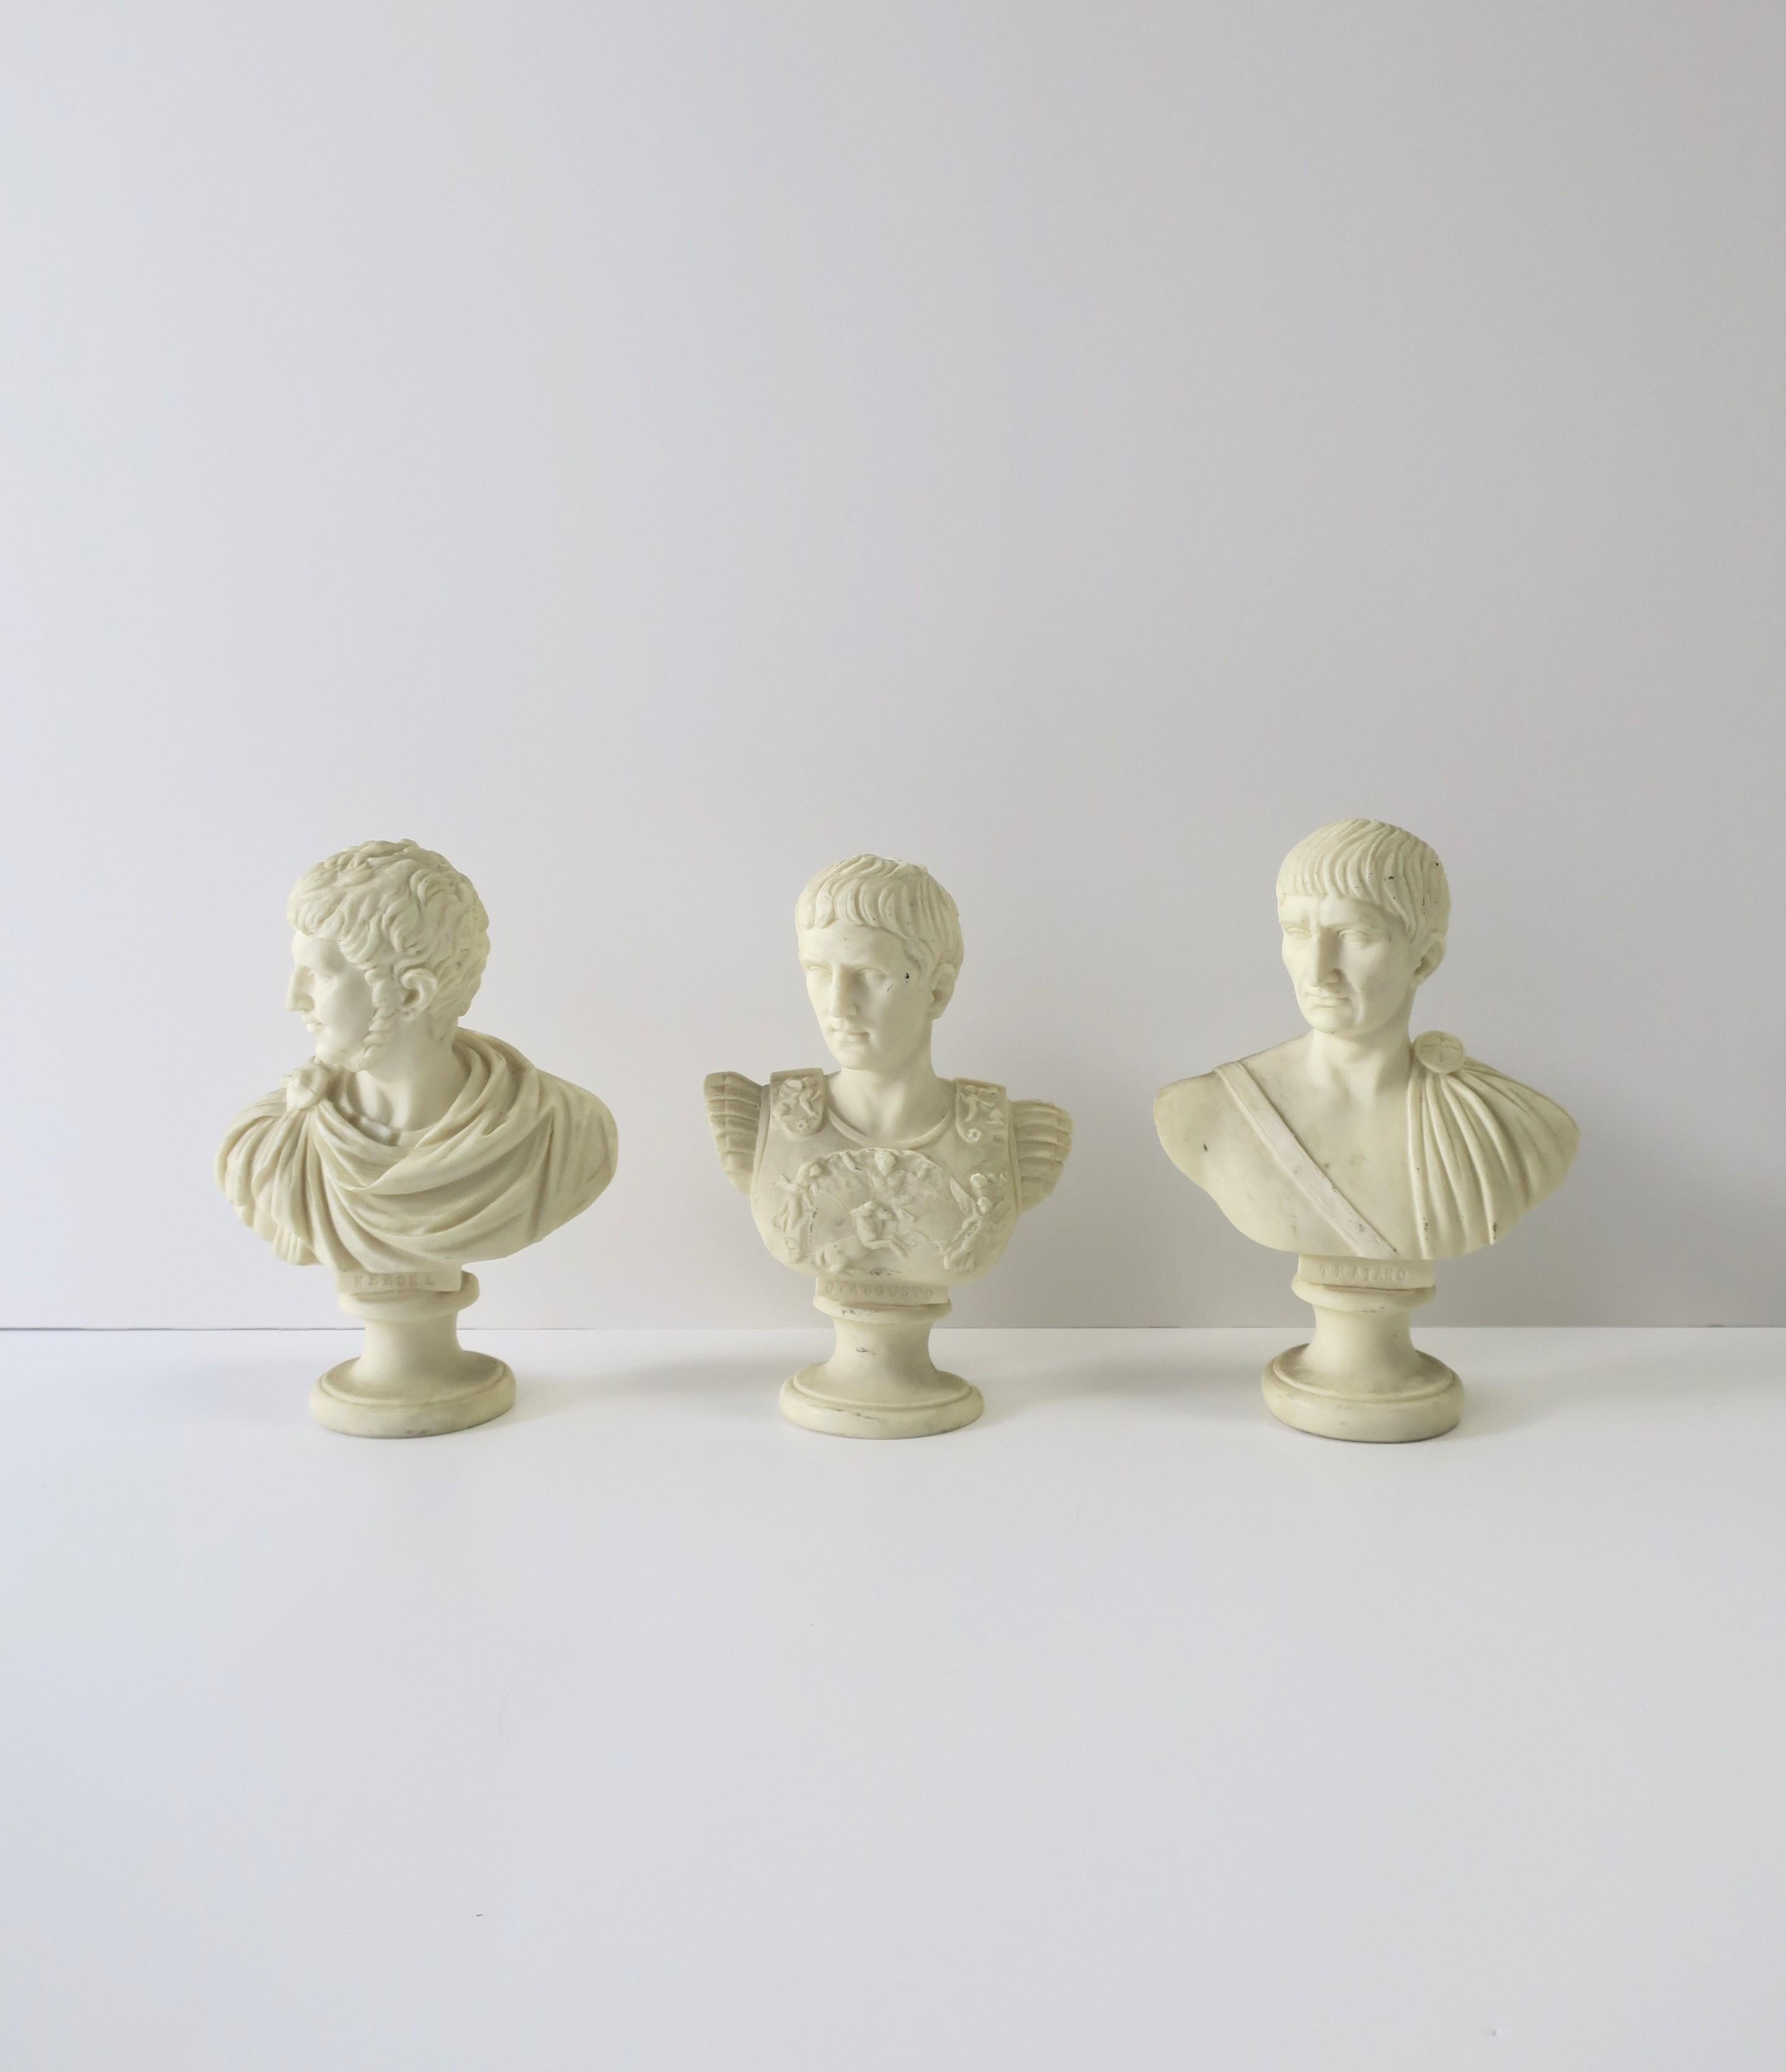 A set of three (3) Italian male sculpture busts by R. Santini, in the classical Roman design style, circa mid-20th century, Italy. This set of busts could be used for a library, office, etc., on a shelf, table, etc. Marked on bottom as shown in